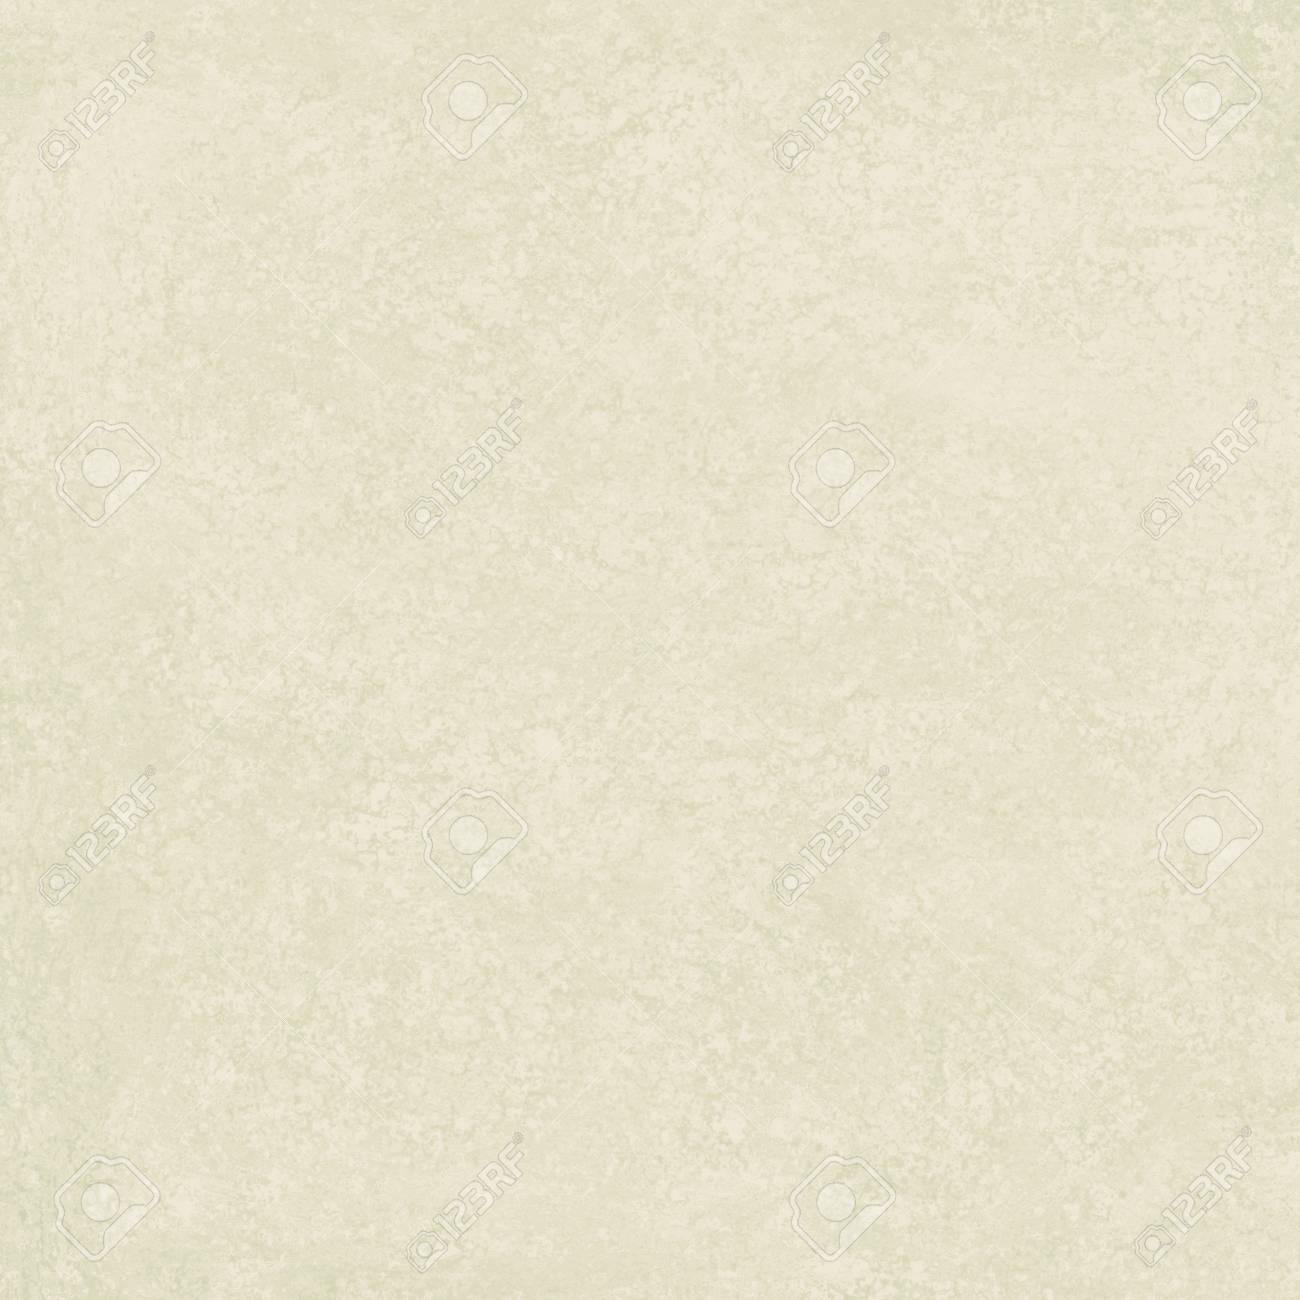 Plain Solid Pastel Beige Or Off White Background With Rough